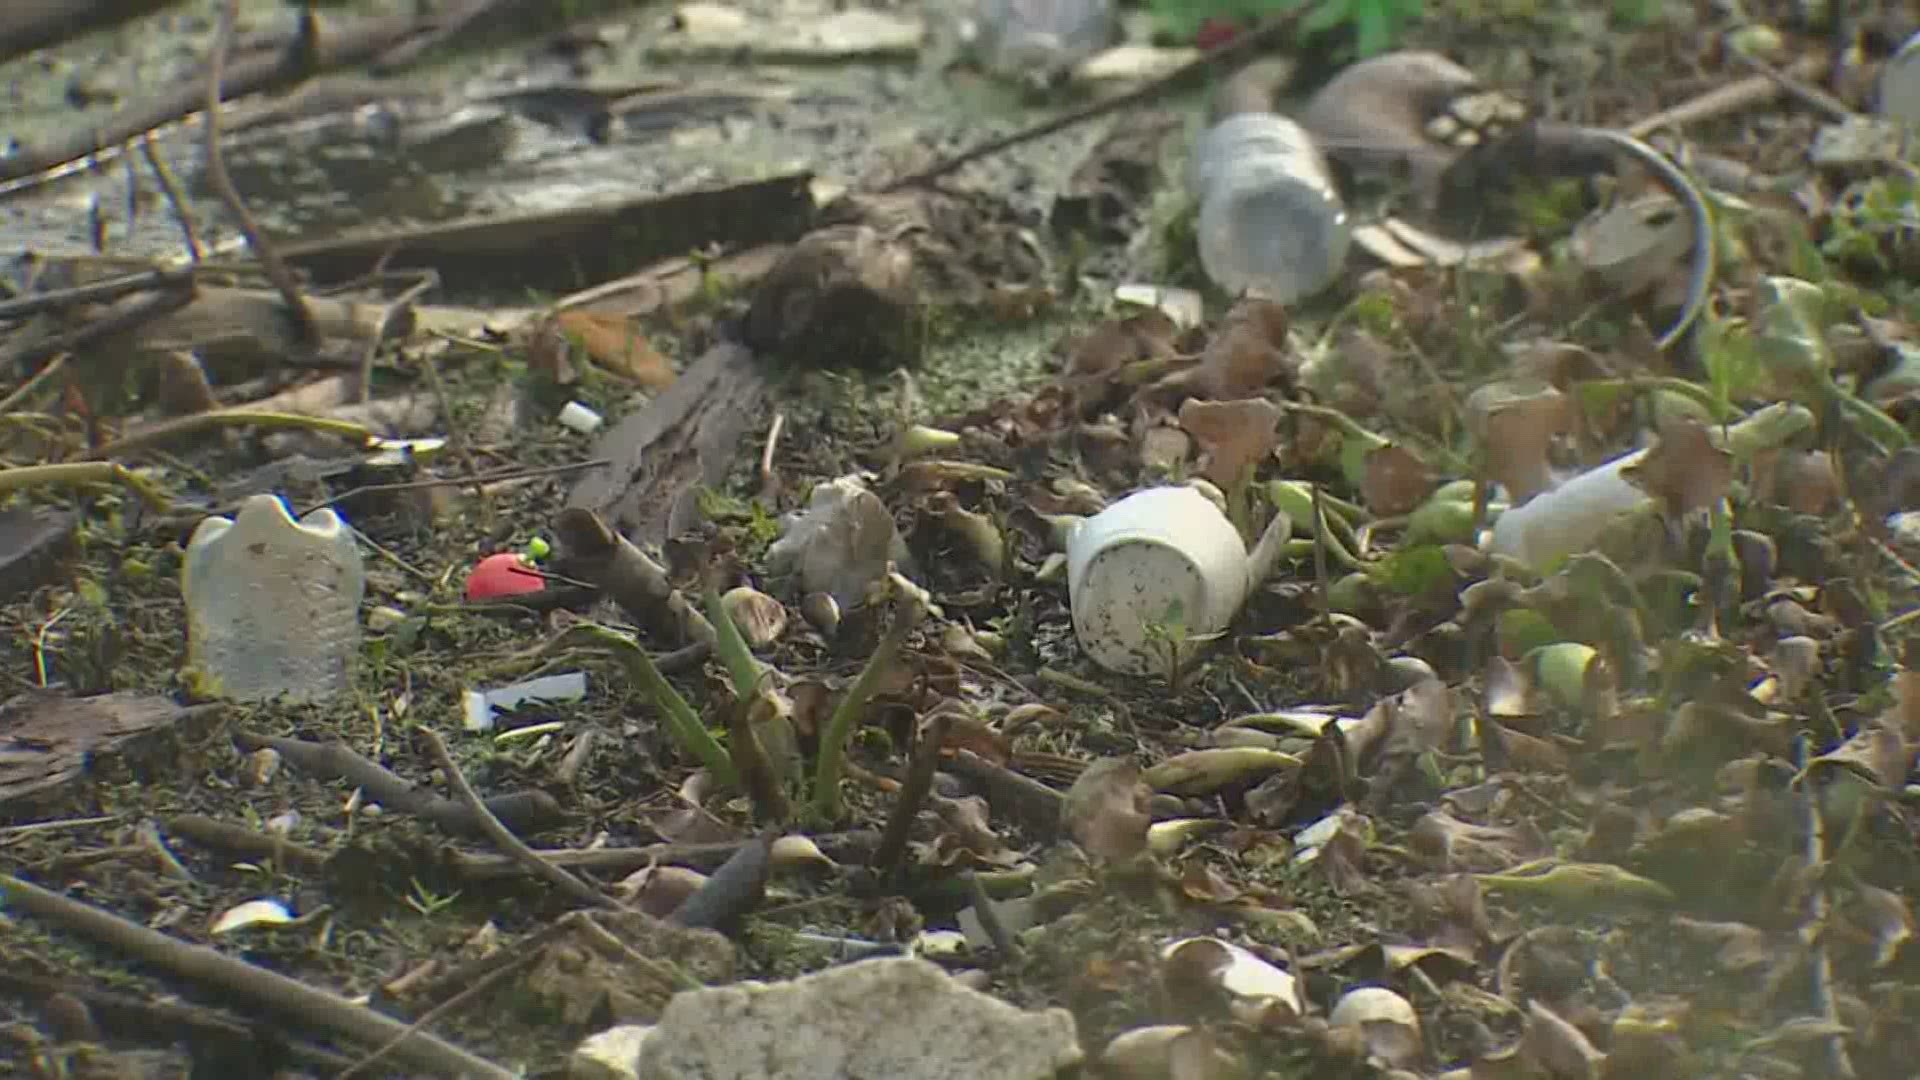 From glorious to gross, residents in Kingwood are fed up with people trashing their waterways. You don’t care? You should if you drink water.